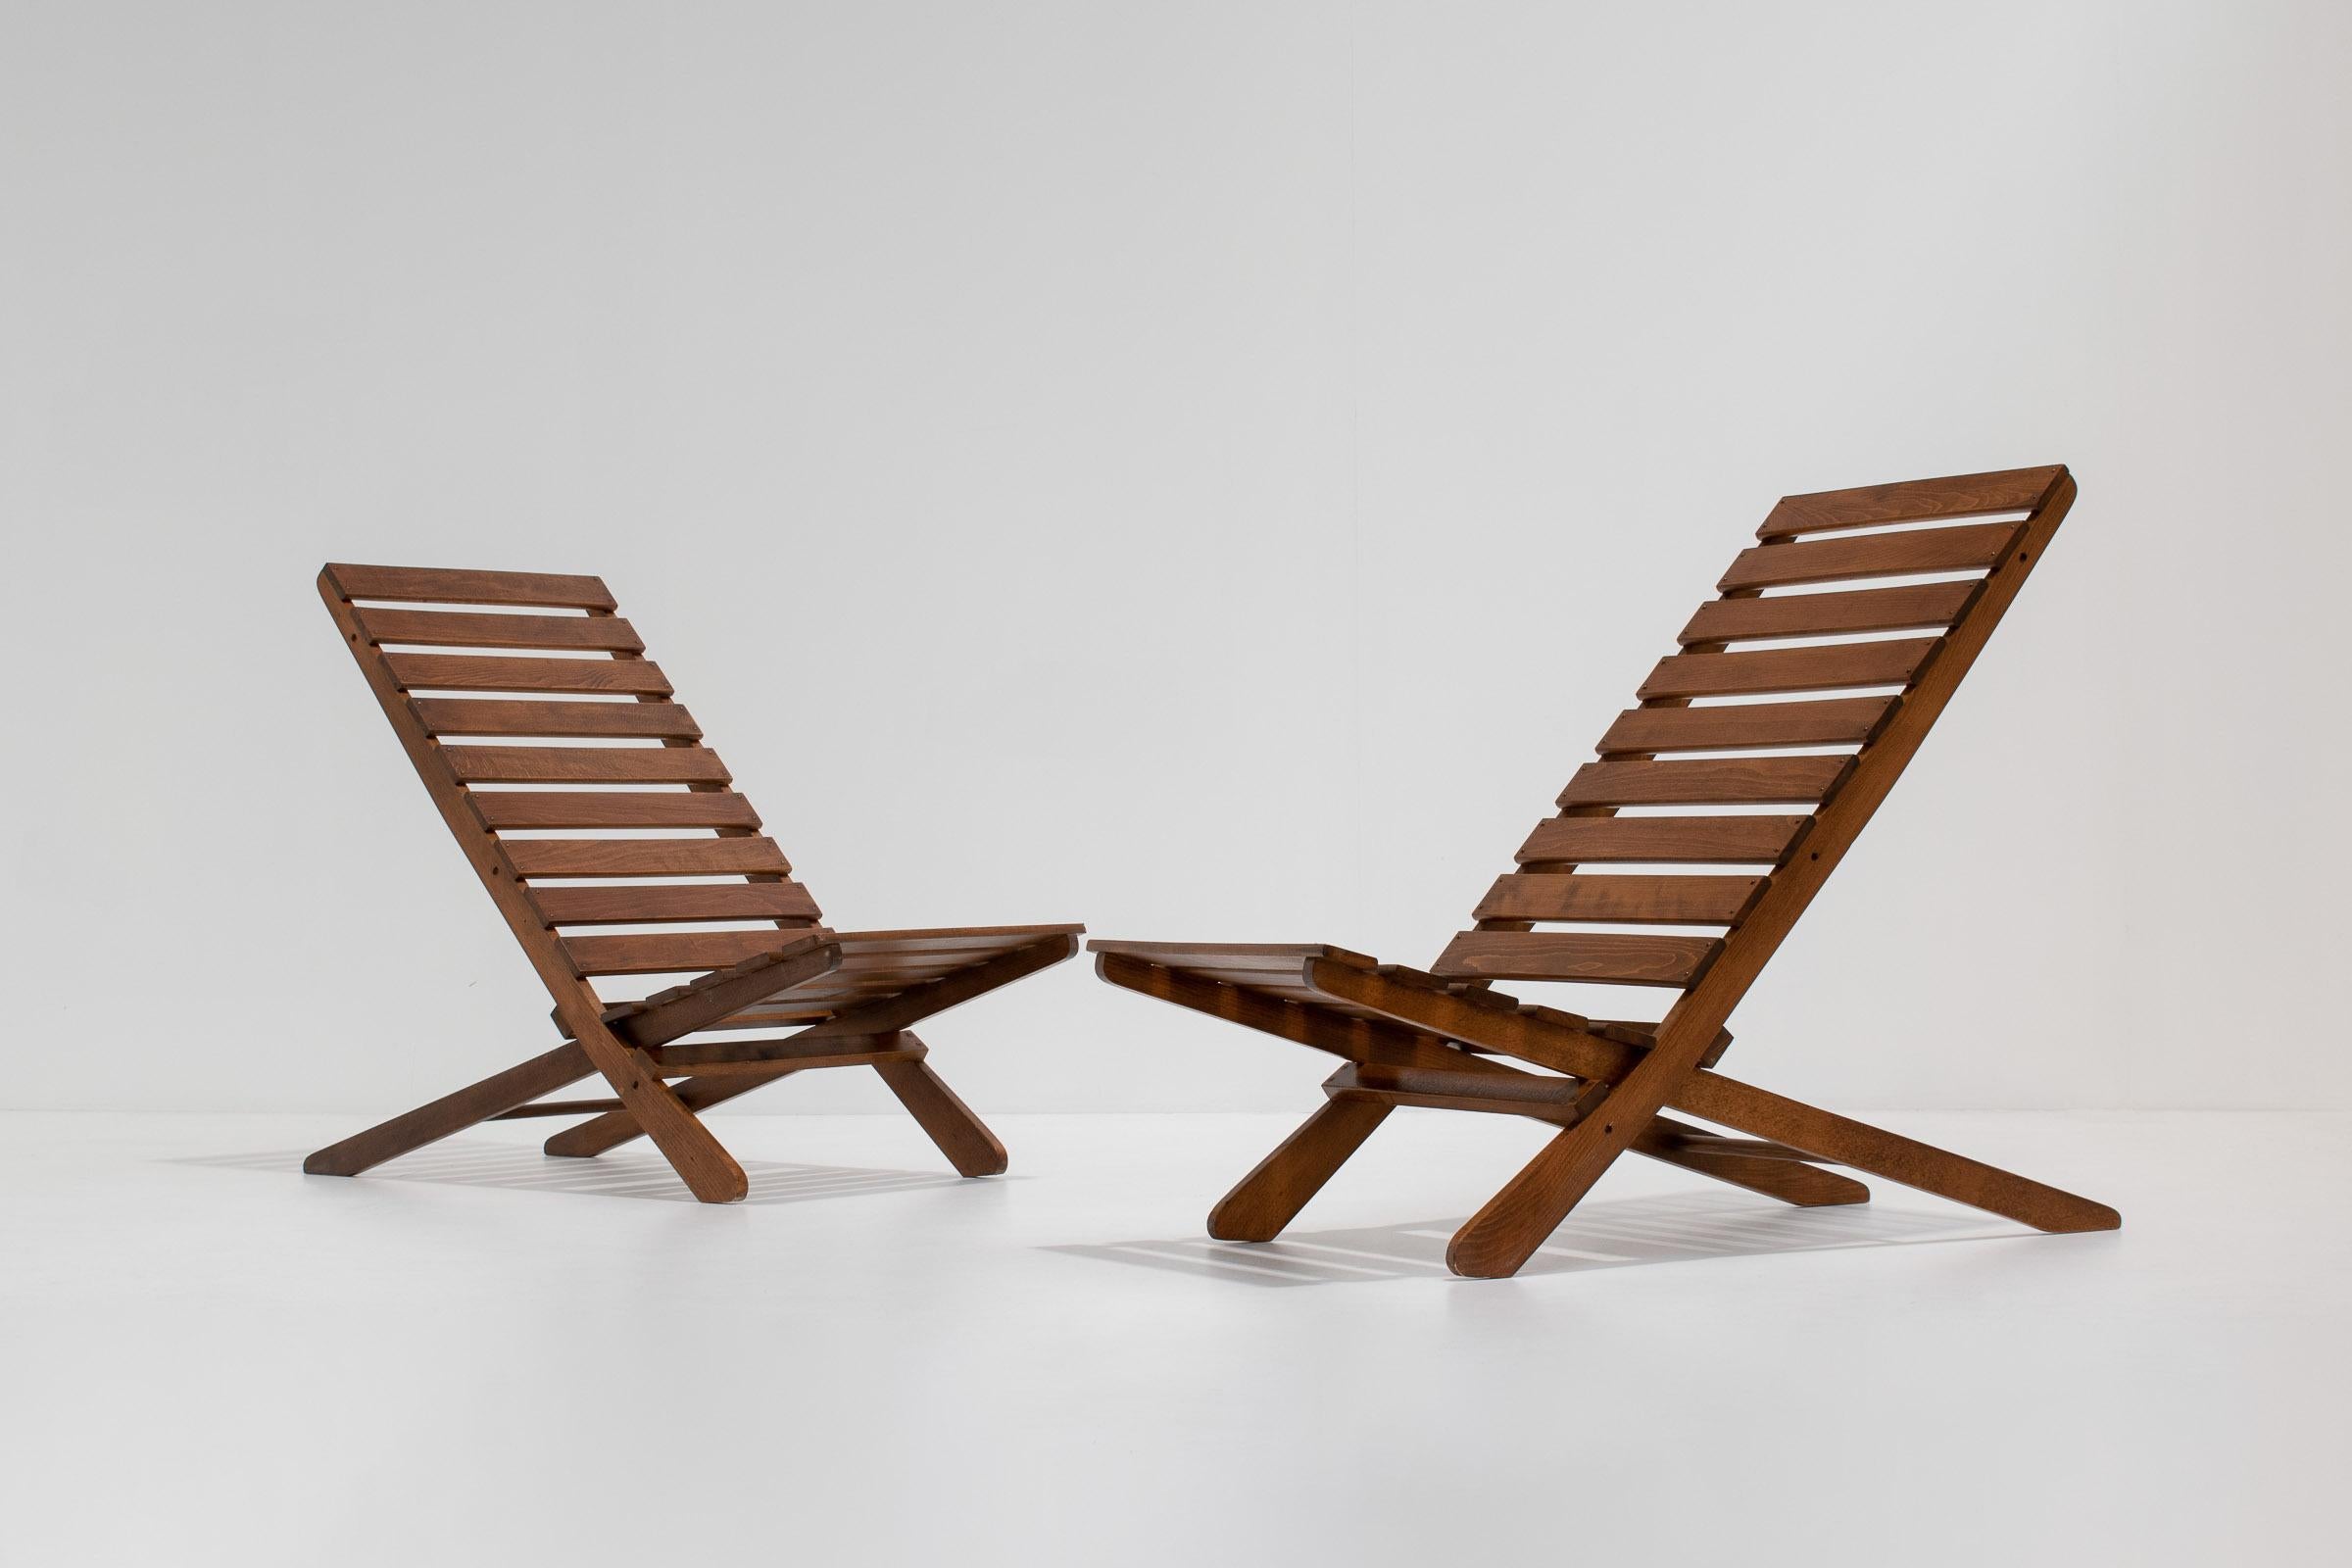 A wonderful & decorative pair of scissor-folding chairs. They have a very architectural feeling to them, thanks to their minimalist design; the construction is as simple as it is visually striking. The chairs can be used as decorative side chairs in